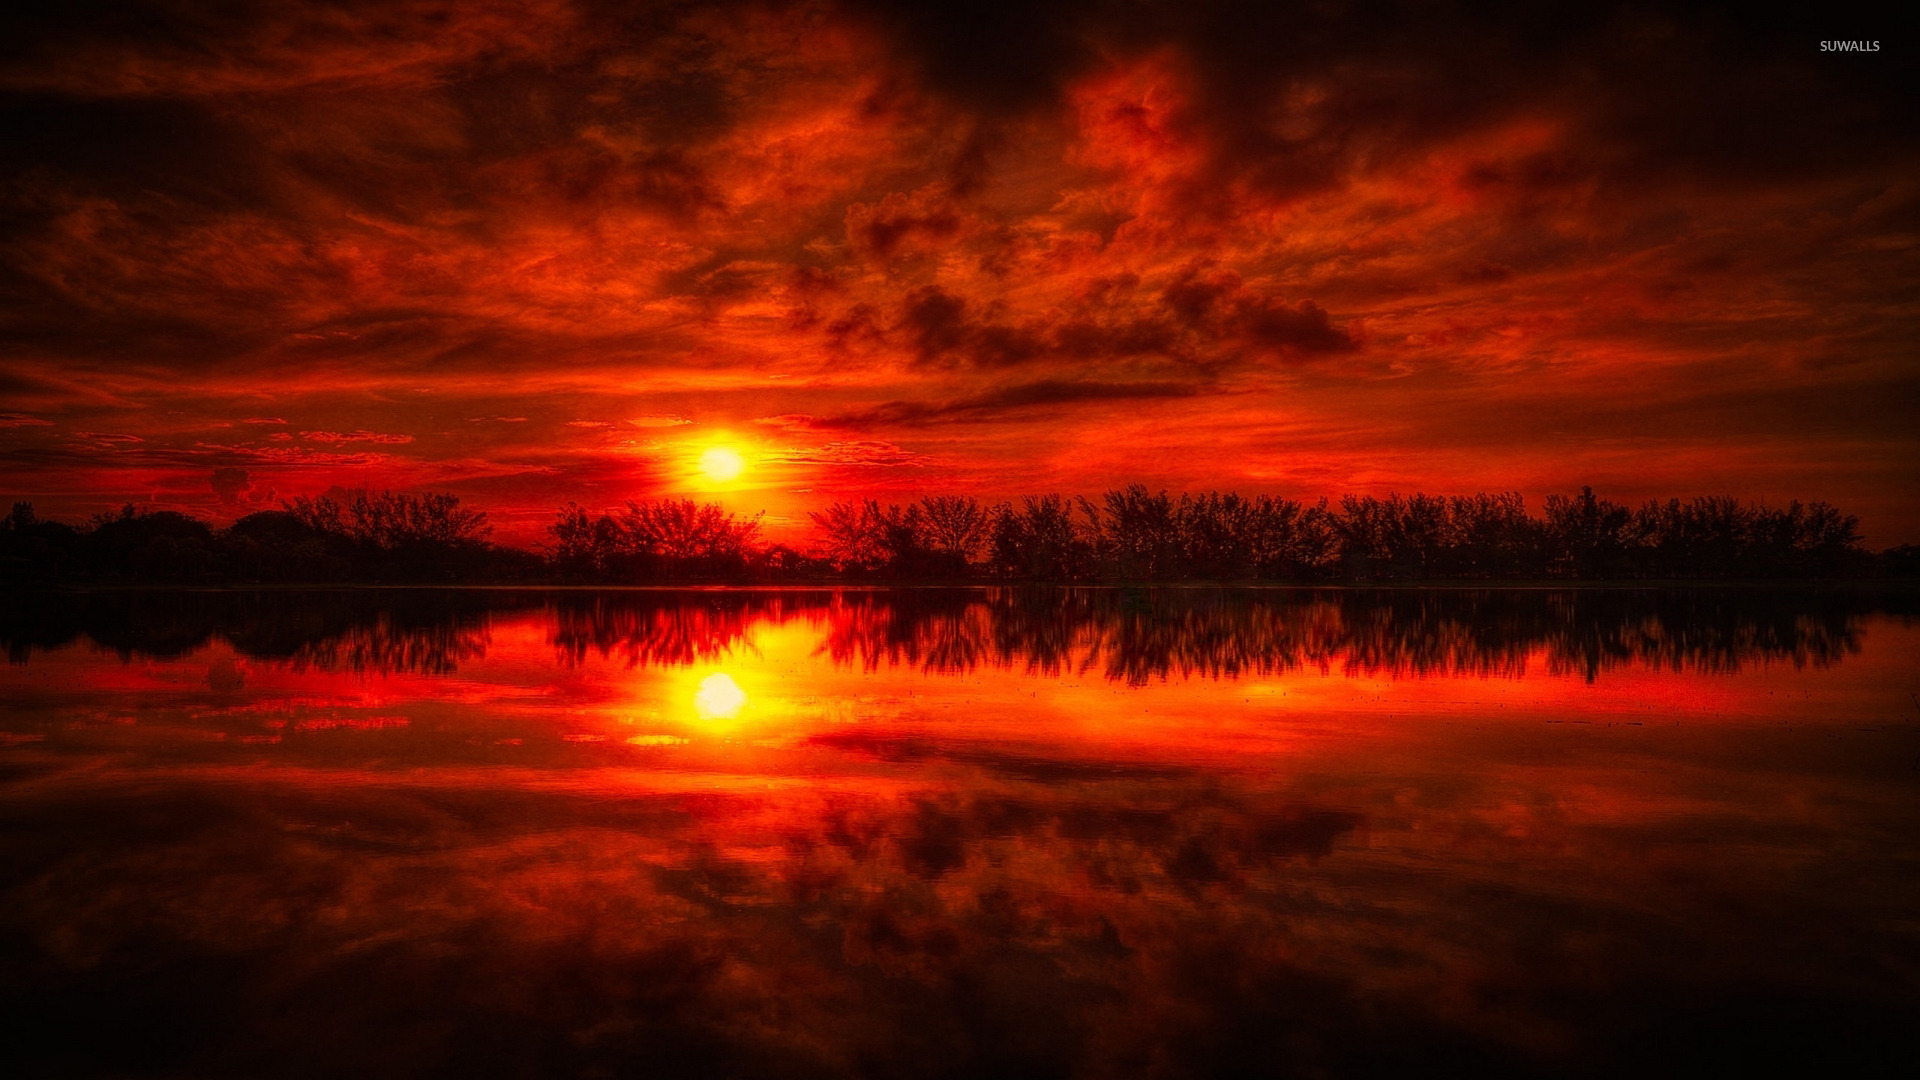 Superb red sunset wallpaper - Nature wallpapers - #42256